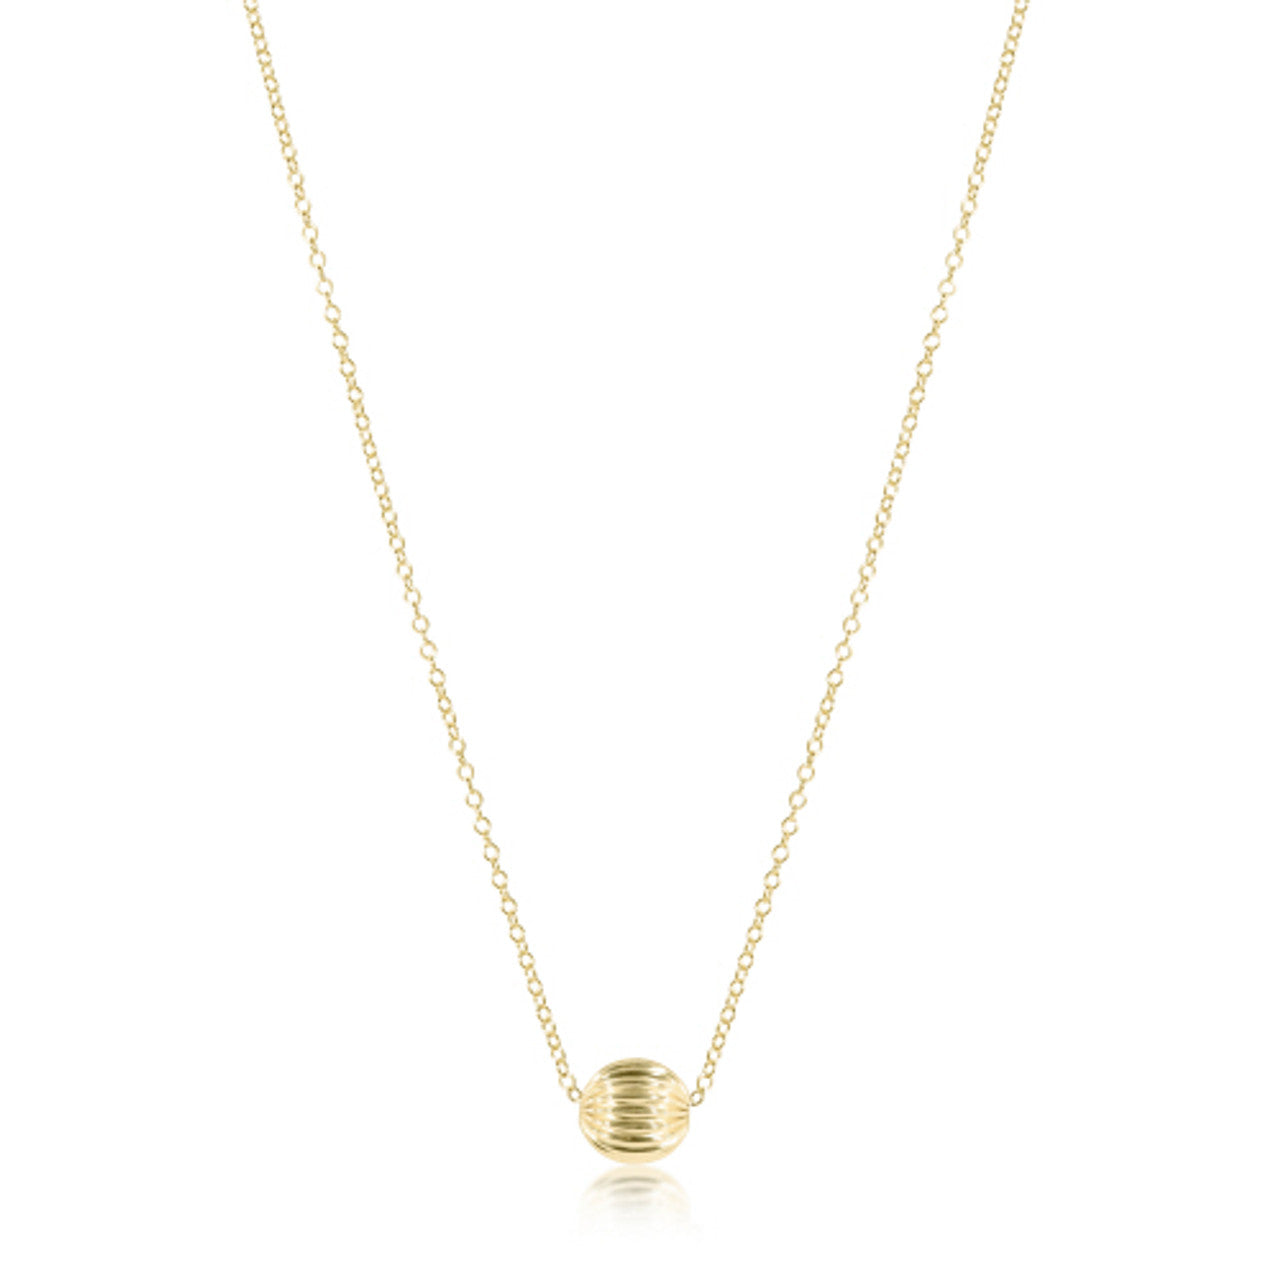 16” Necklace Gold - Dignity 8mm Gold